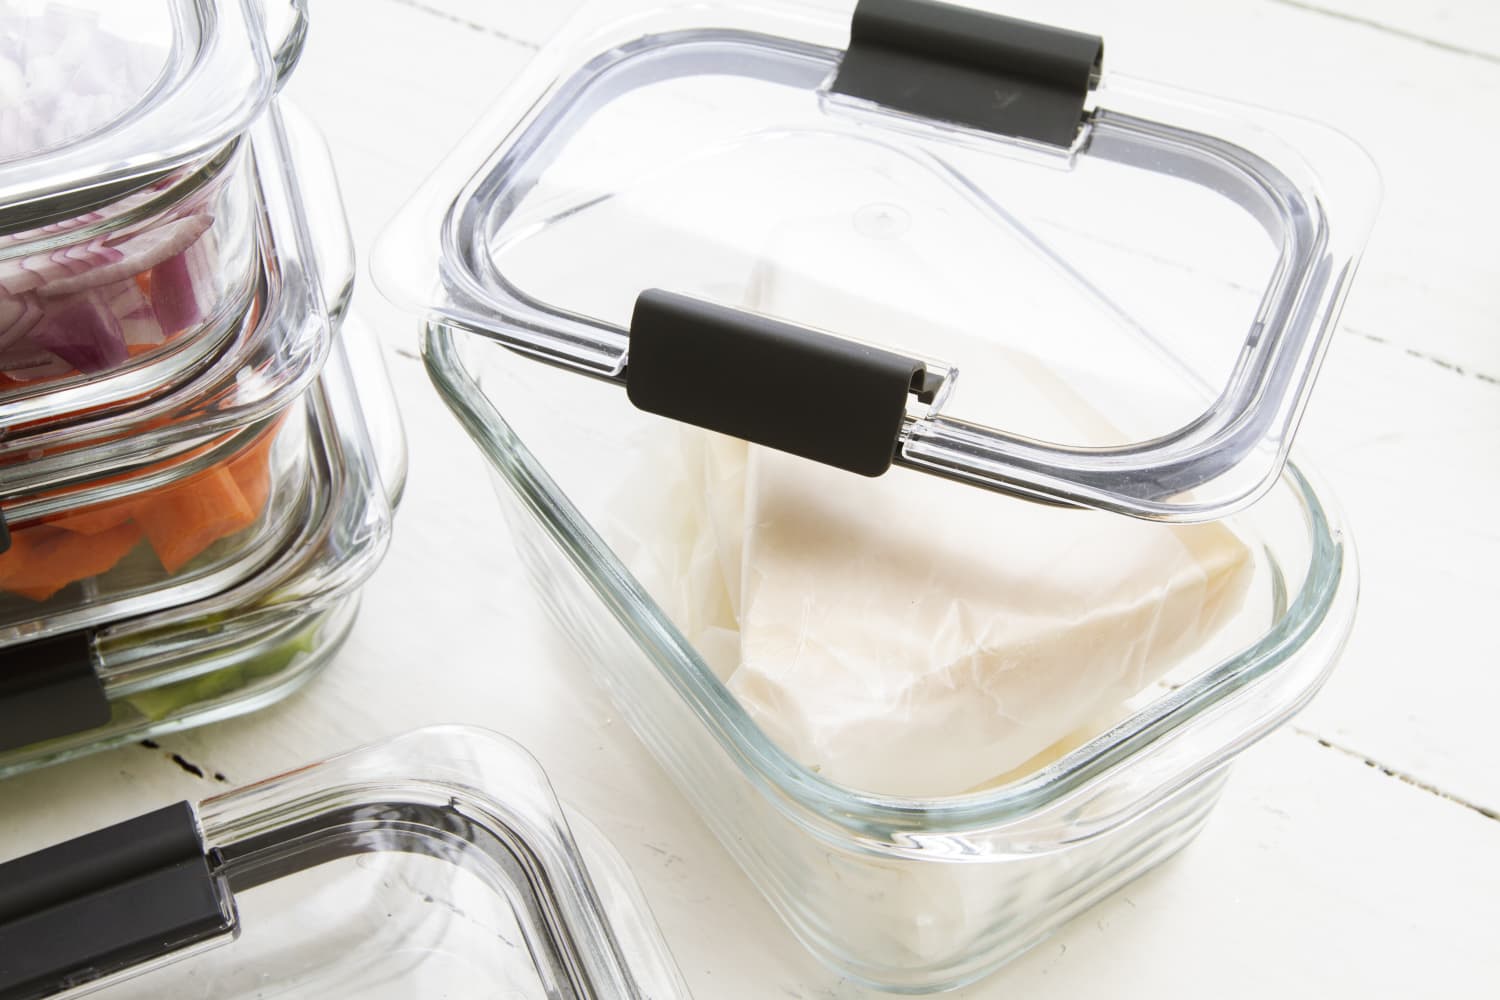 Rubbermaid Brilliance containers - if you're looking to invest in some  reusables that actually work these are the way and the truth, they also  come in glass if that's more your speed